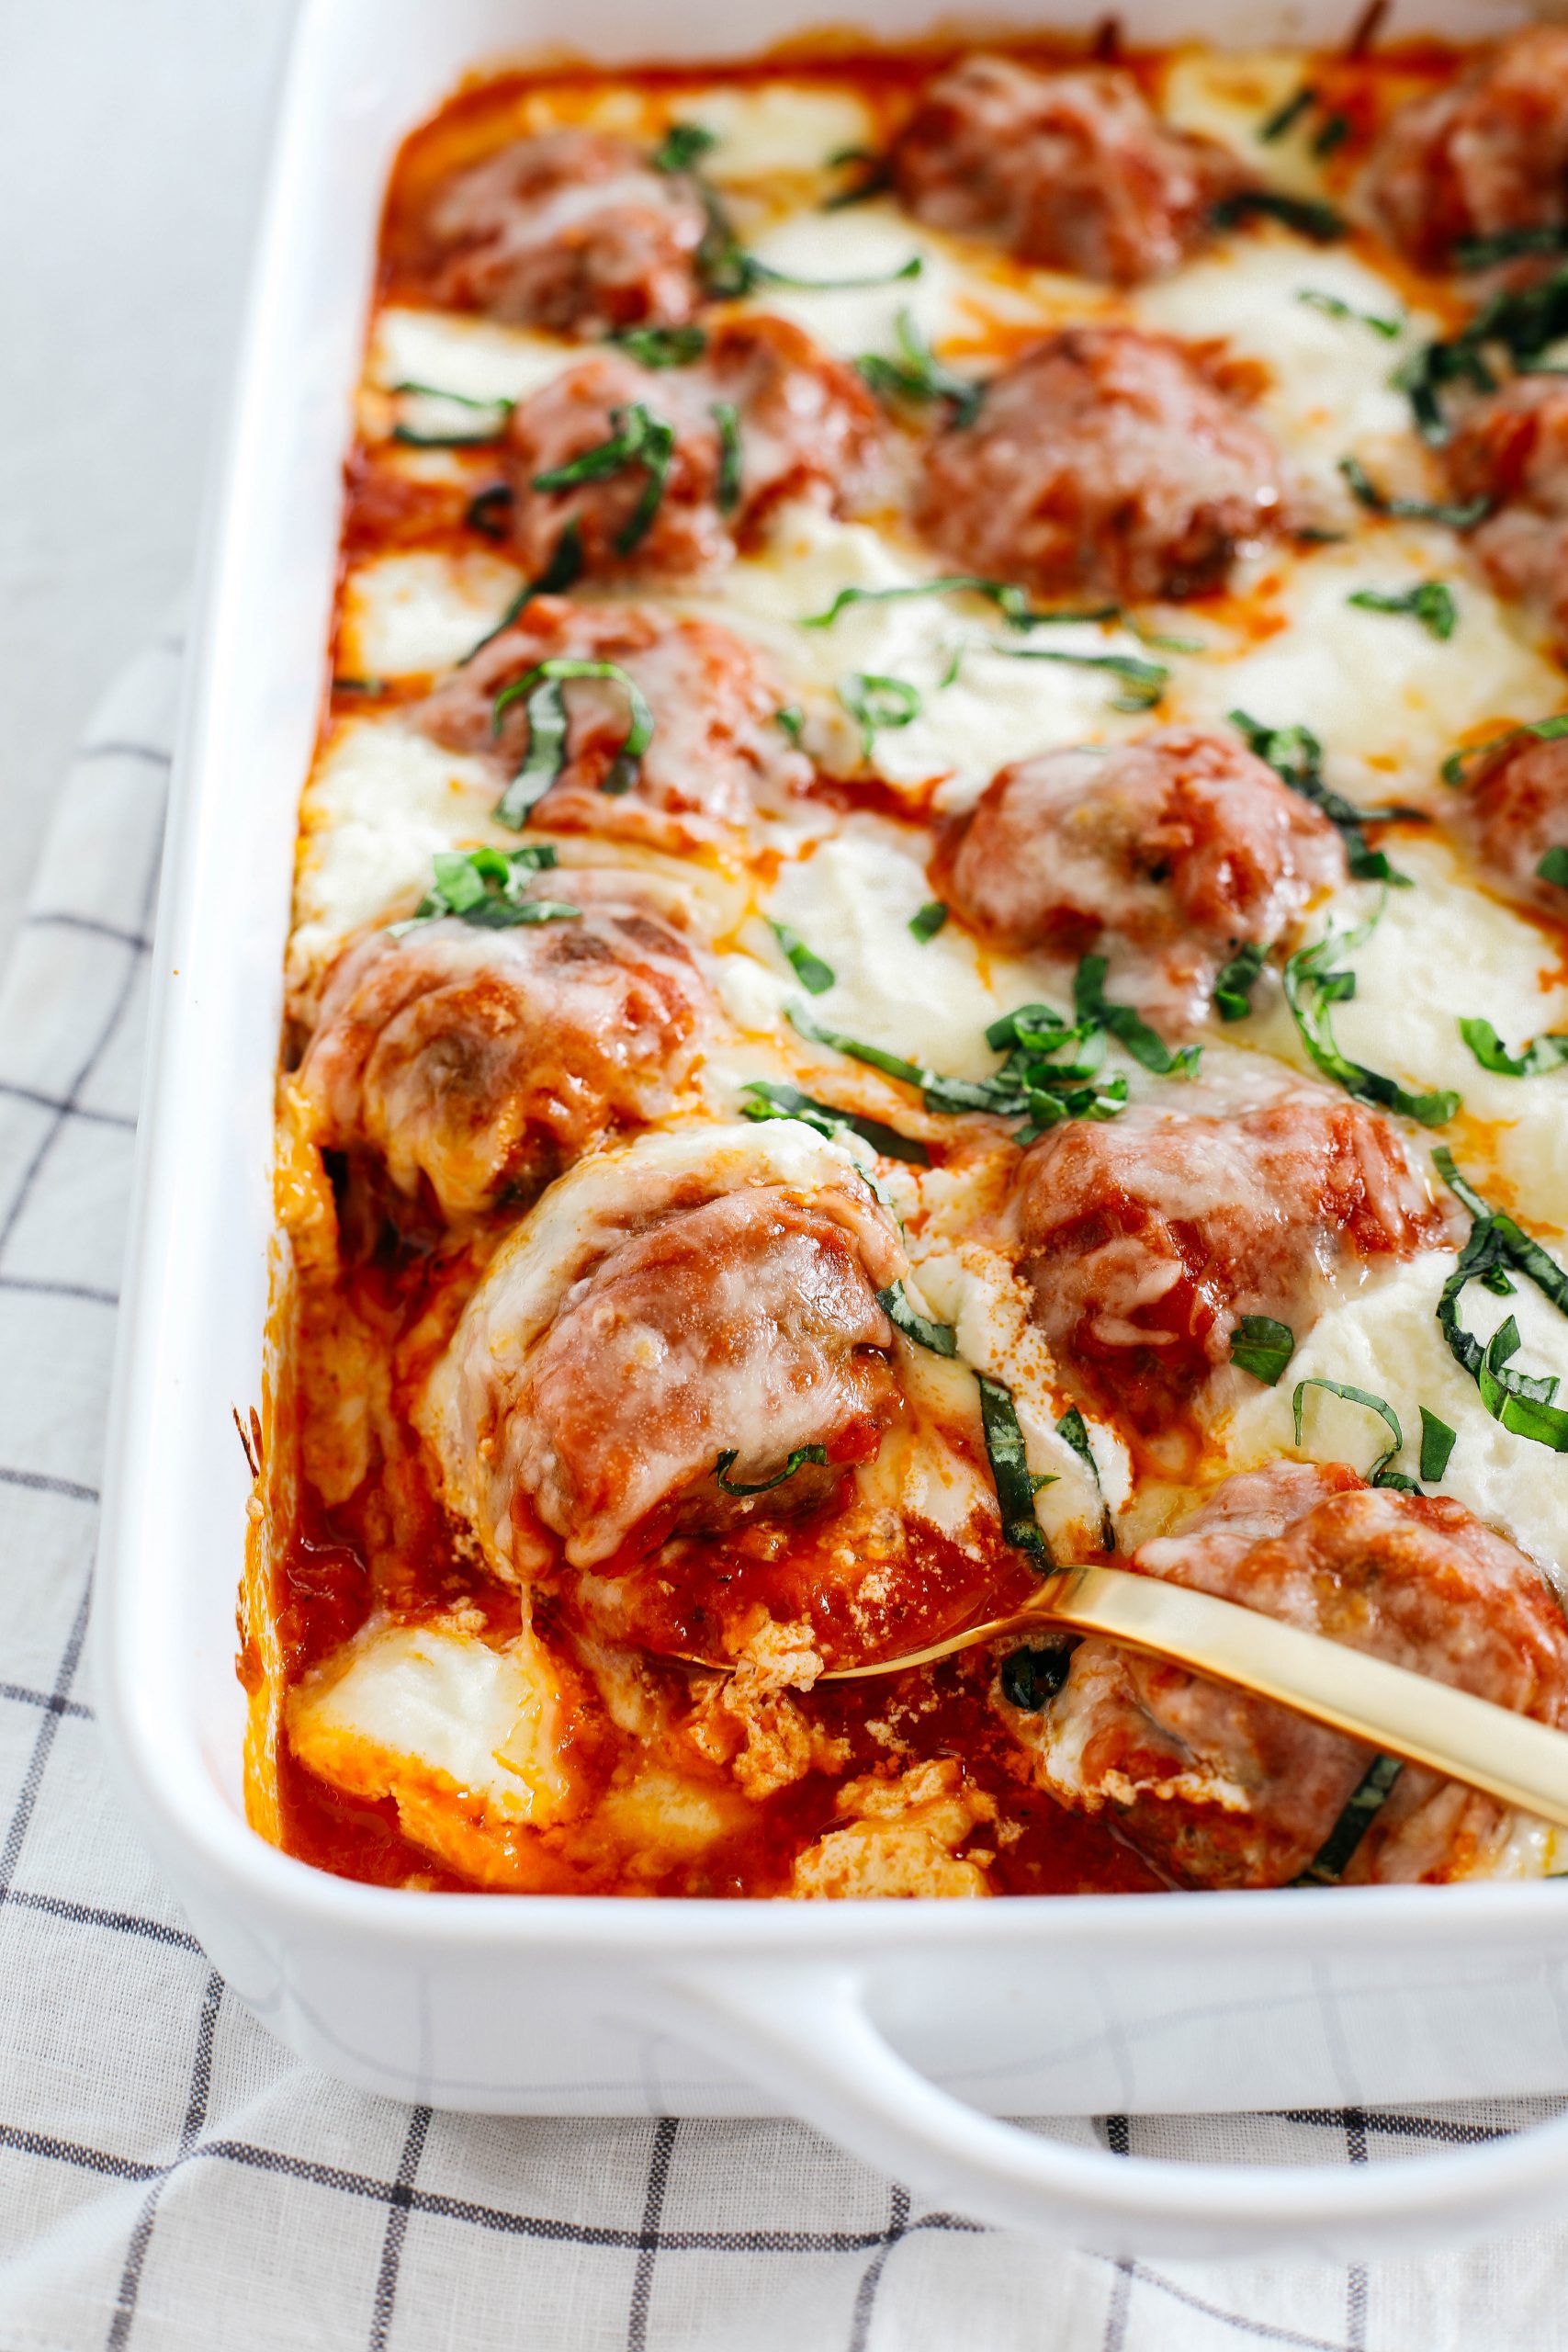 This Cheesy Keto Meatball Casserole is delicious and super filling with homemade meatballs topped with creamy ricotta cheese, mozzarella and parmesan for the perfect low carb meal your whole family will enjoy!